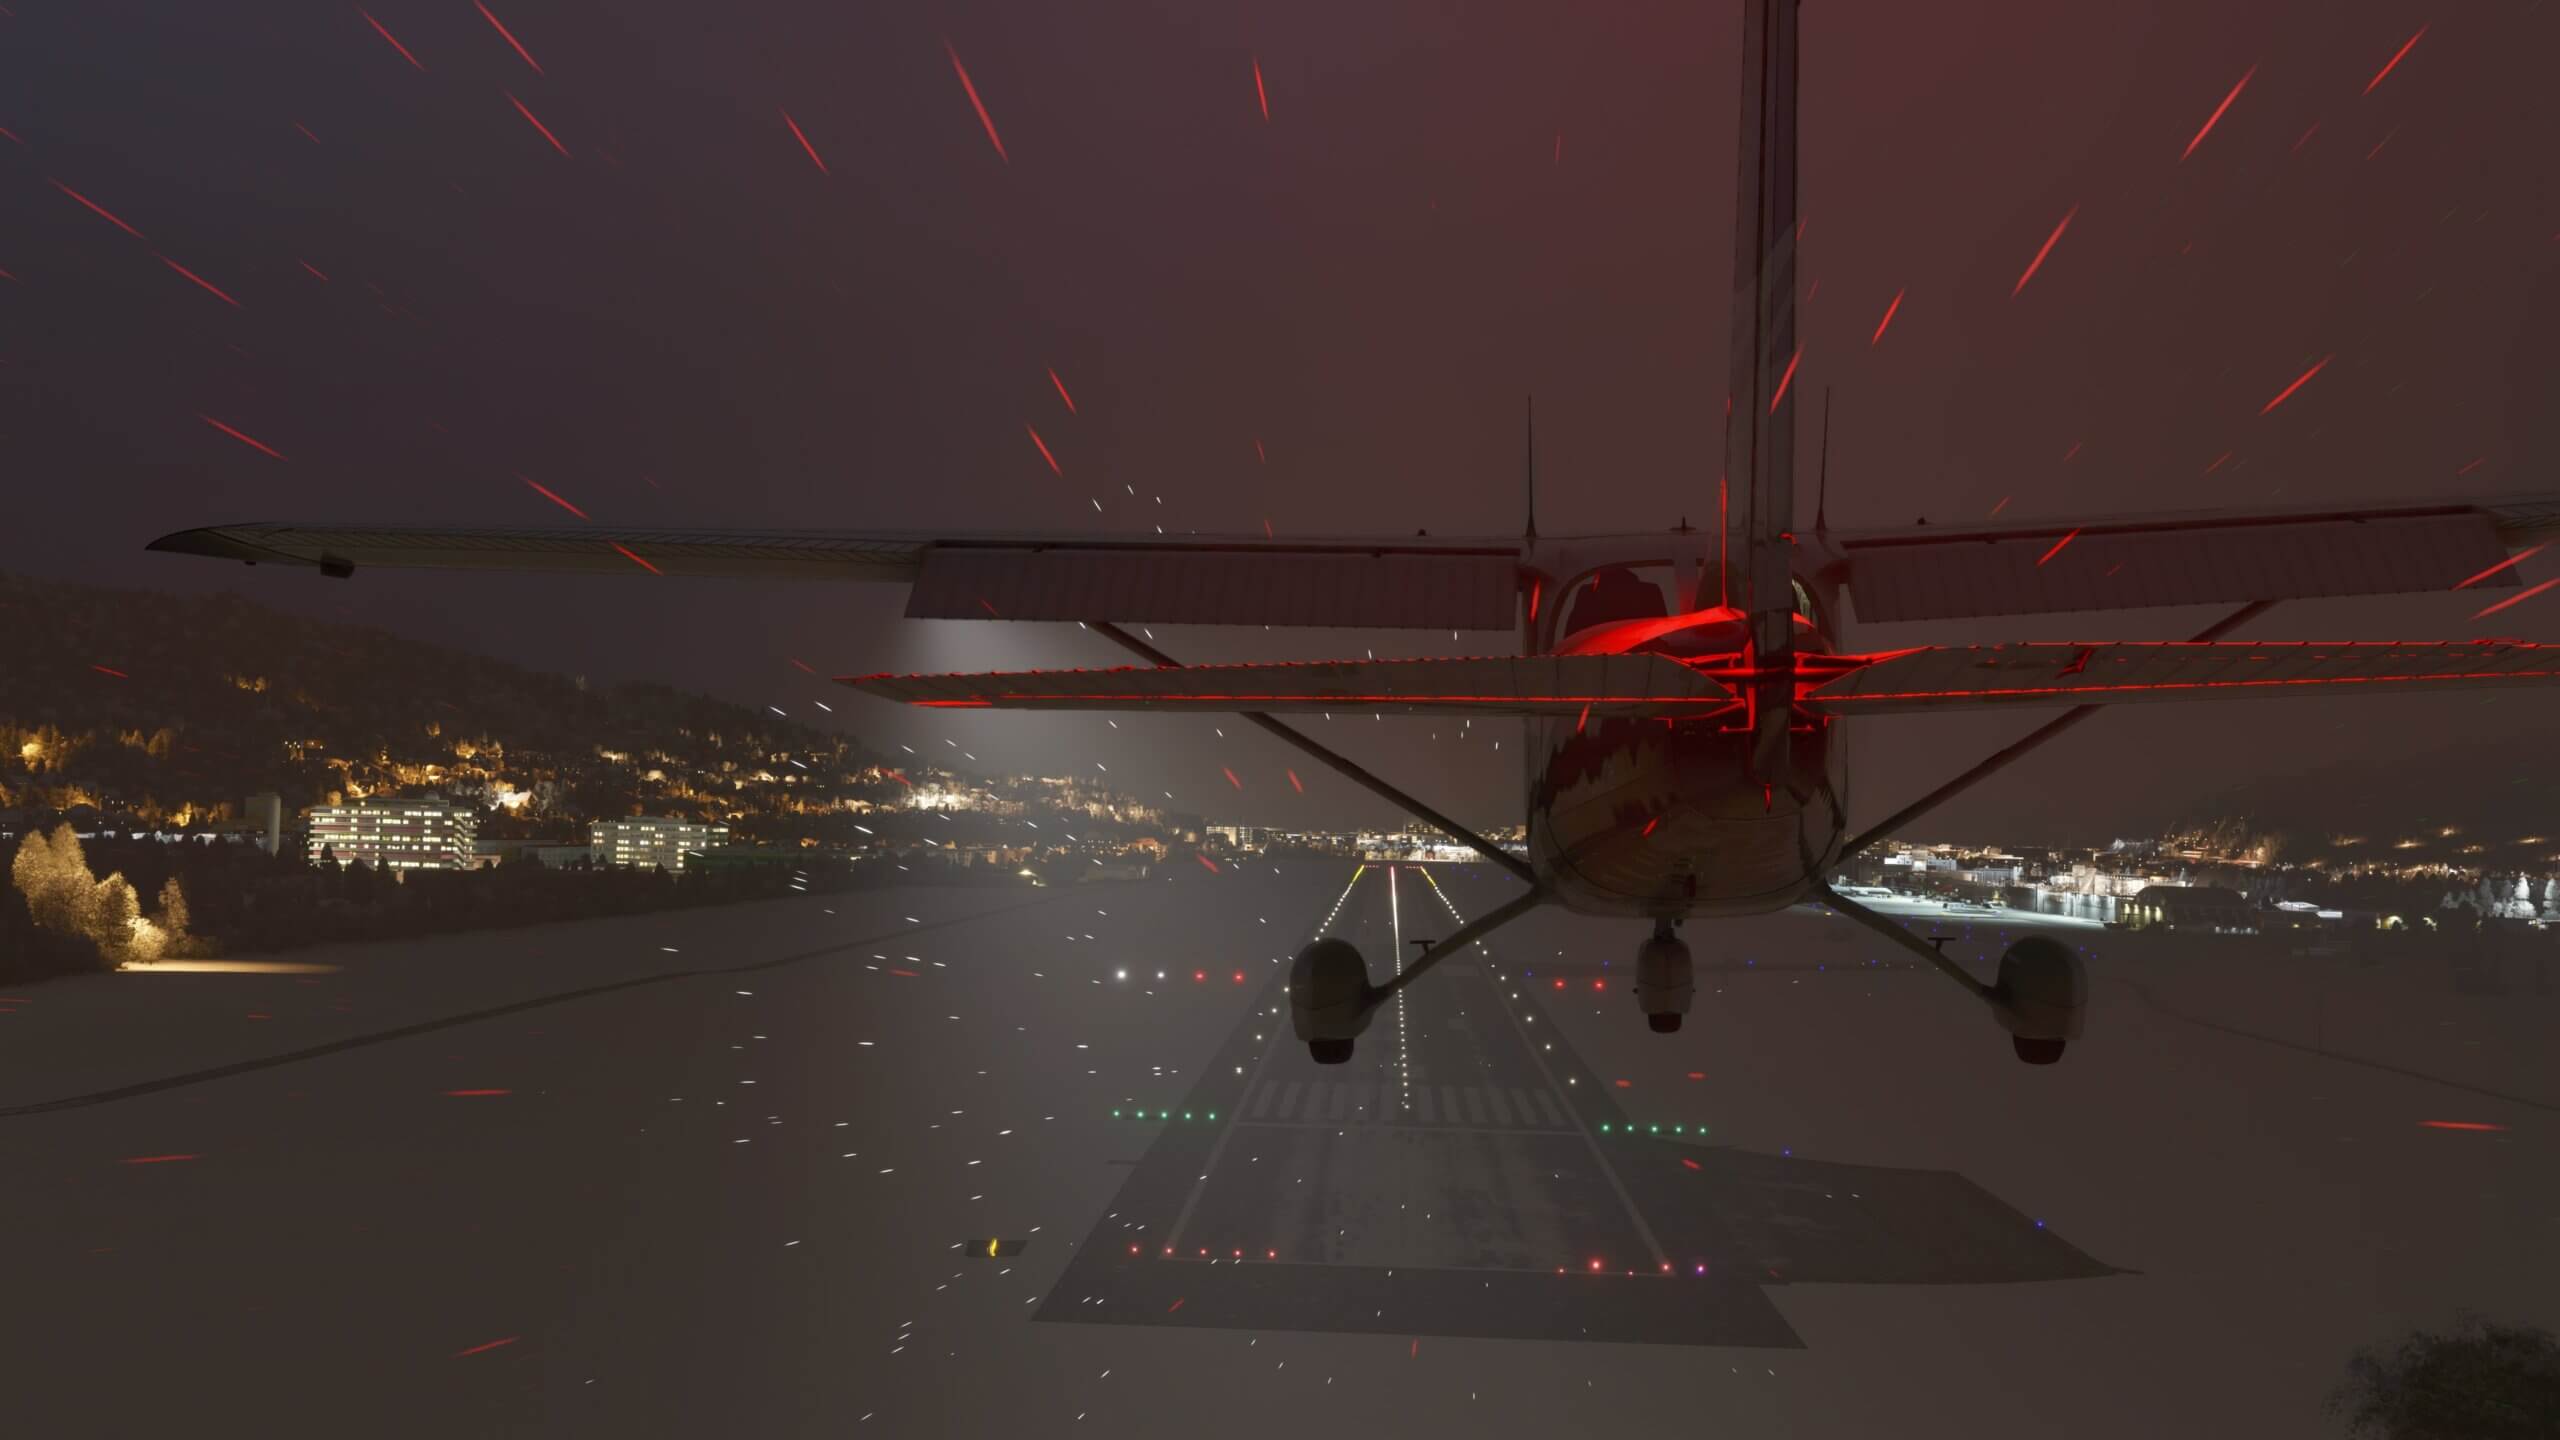 A Cessna comes into land at night with snow covering the airport apron.